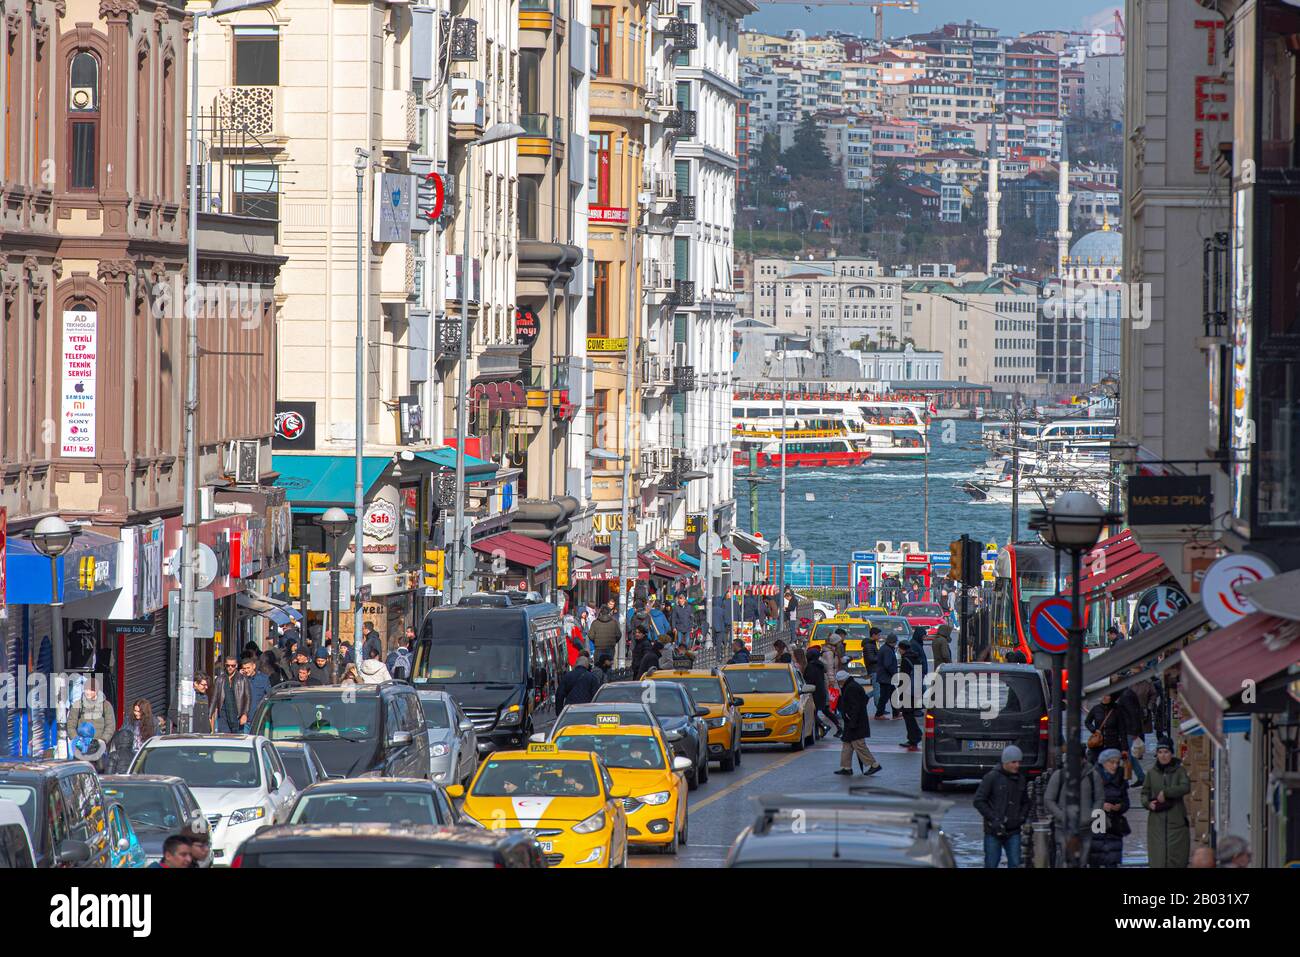 ISTANBUL - JAN 01: View one of the main Street of Istanbul with city life on January 01. 2020 in Turkey Stock Photo